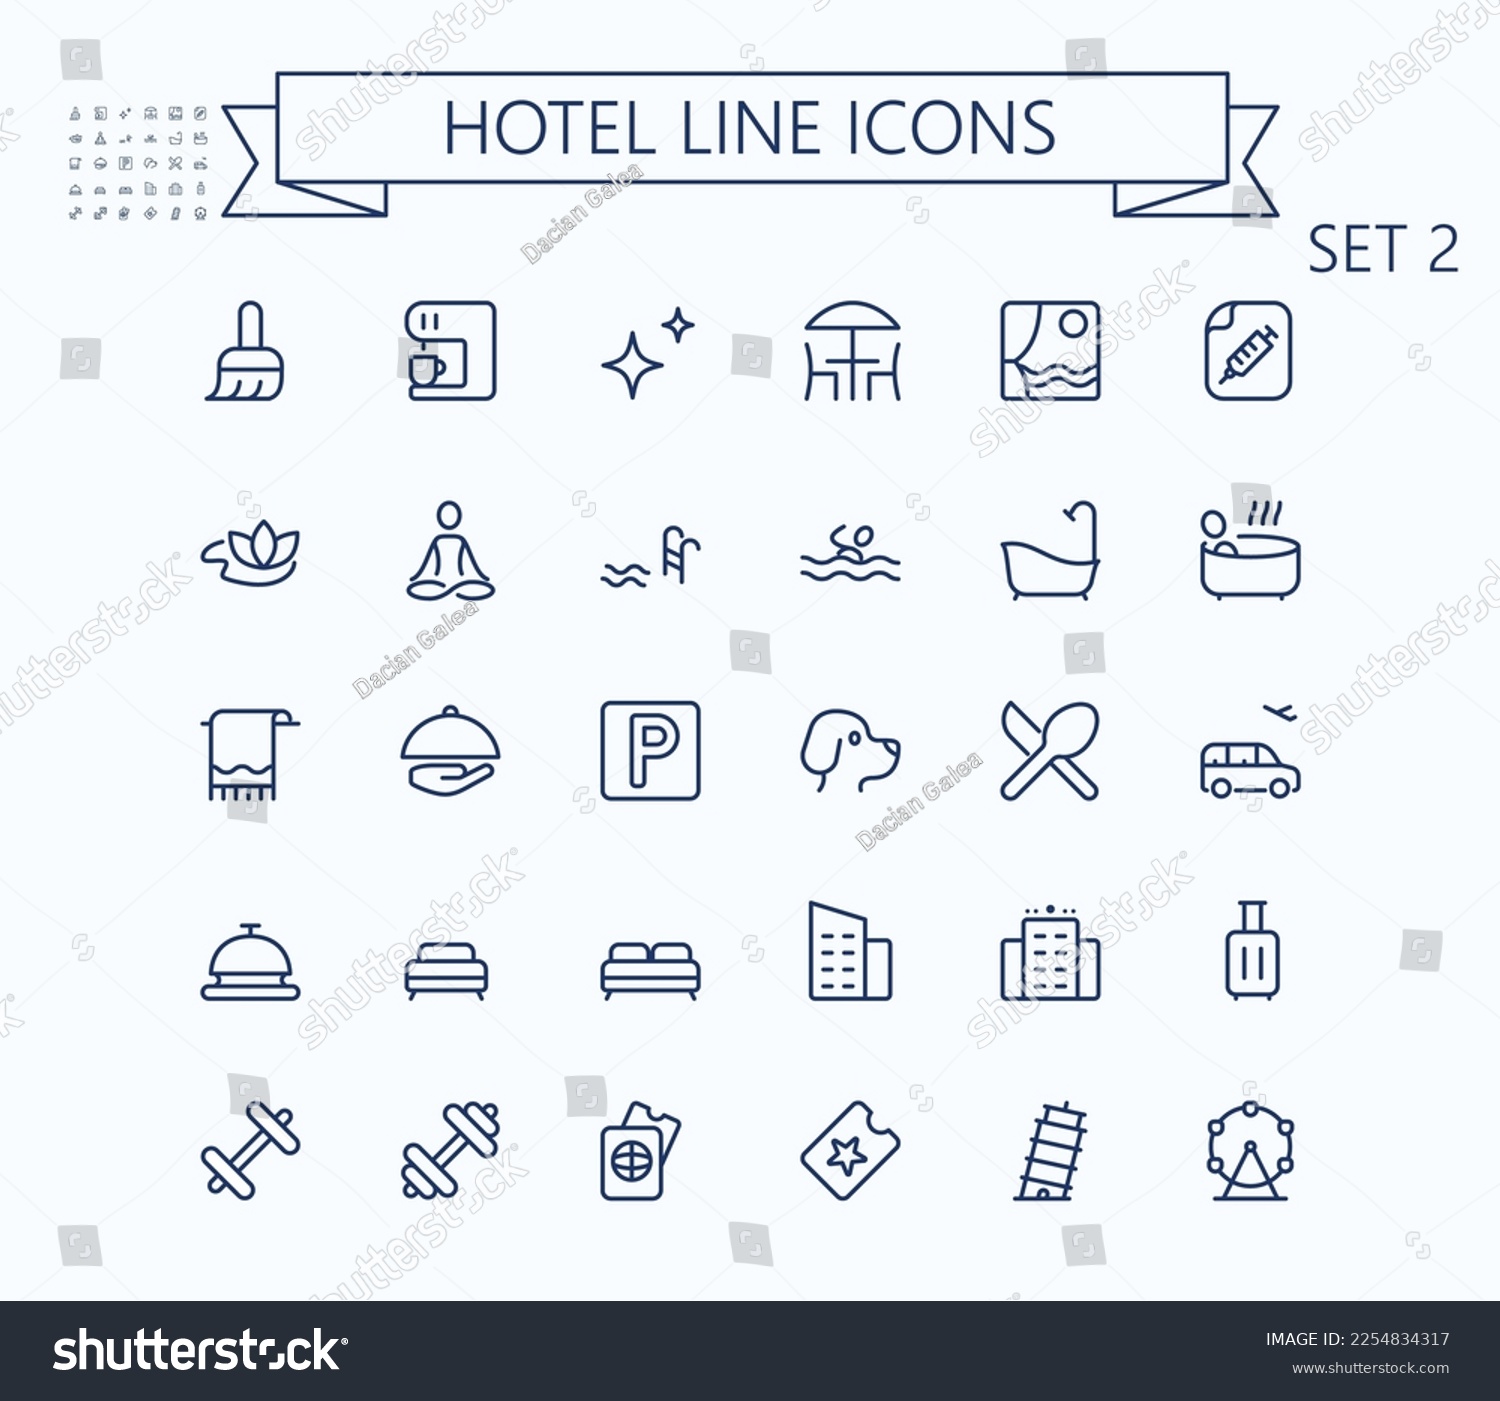 SVG of Hotel line vector icons. Travel icon set. Editable stroke. 24x24 grid. Pixel Perfect.  svg